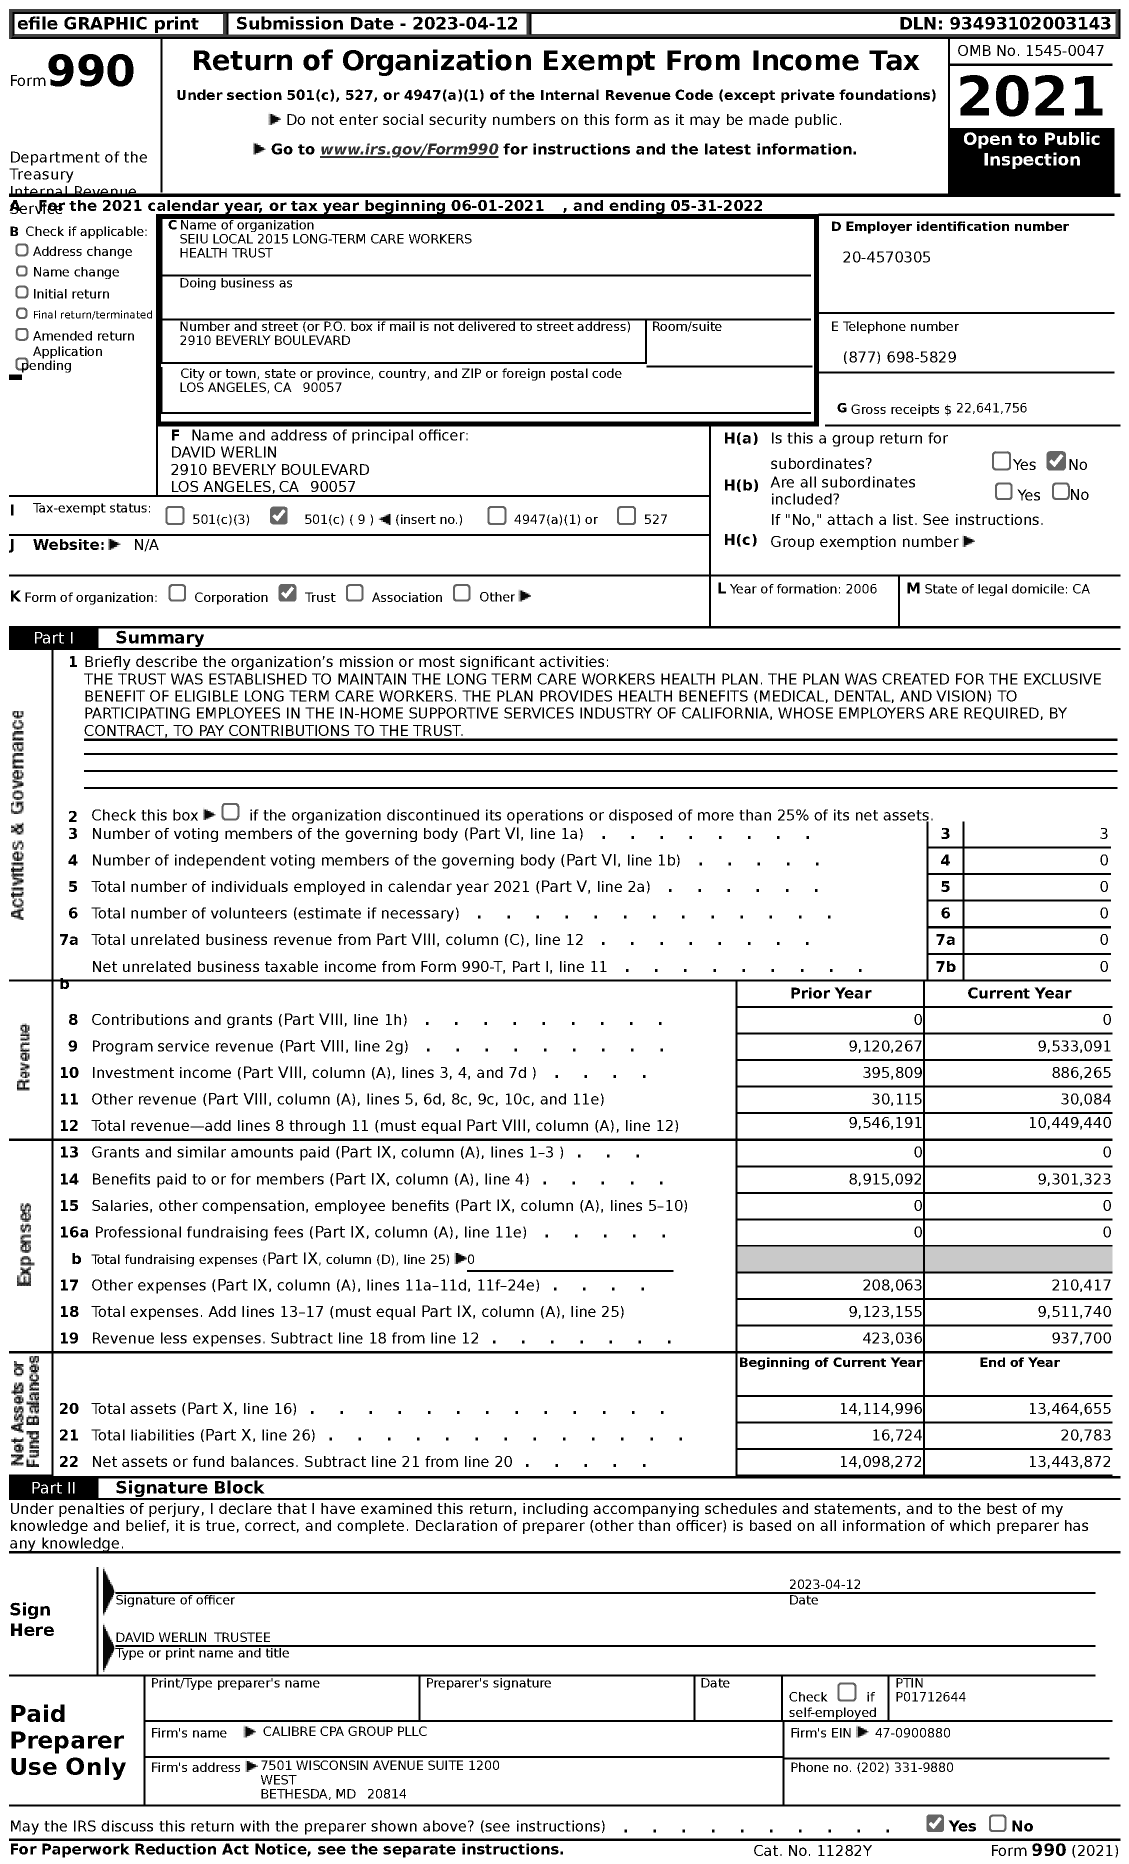 Image of first page of 2021 Form 990 for Seiu Local 2015 Long-Term Care Workers Health Trust